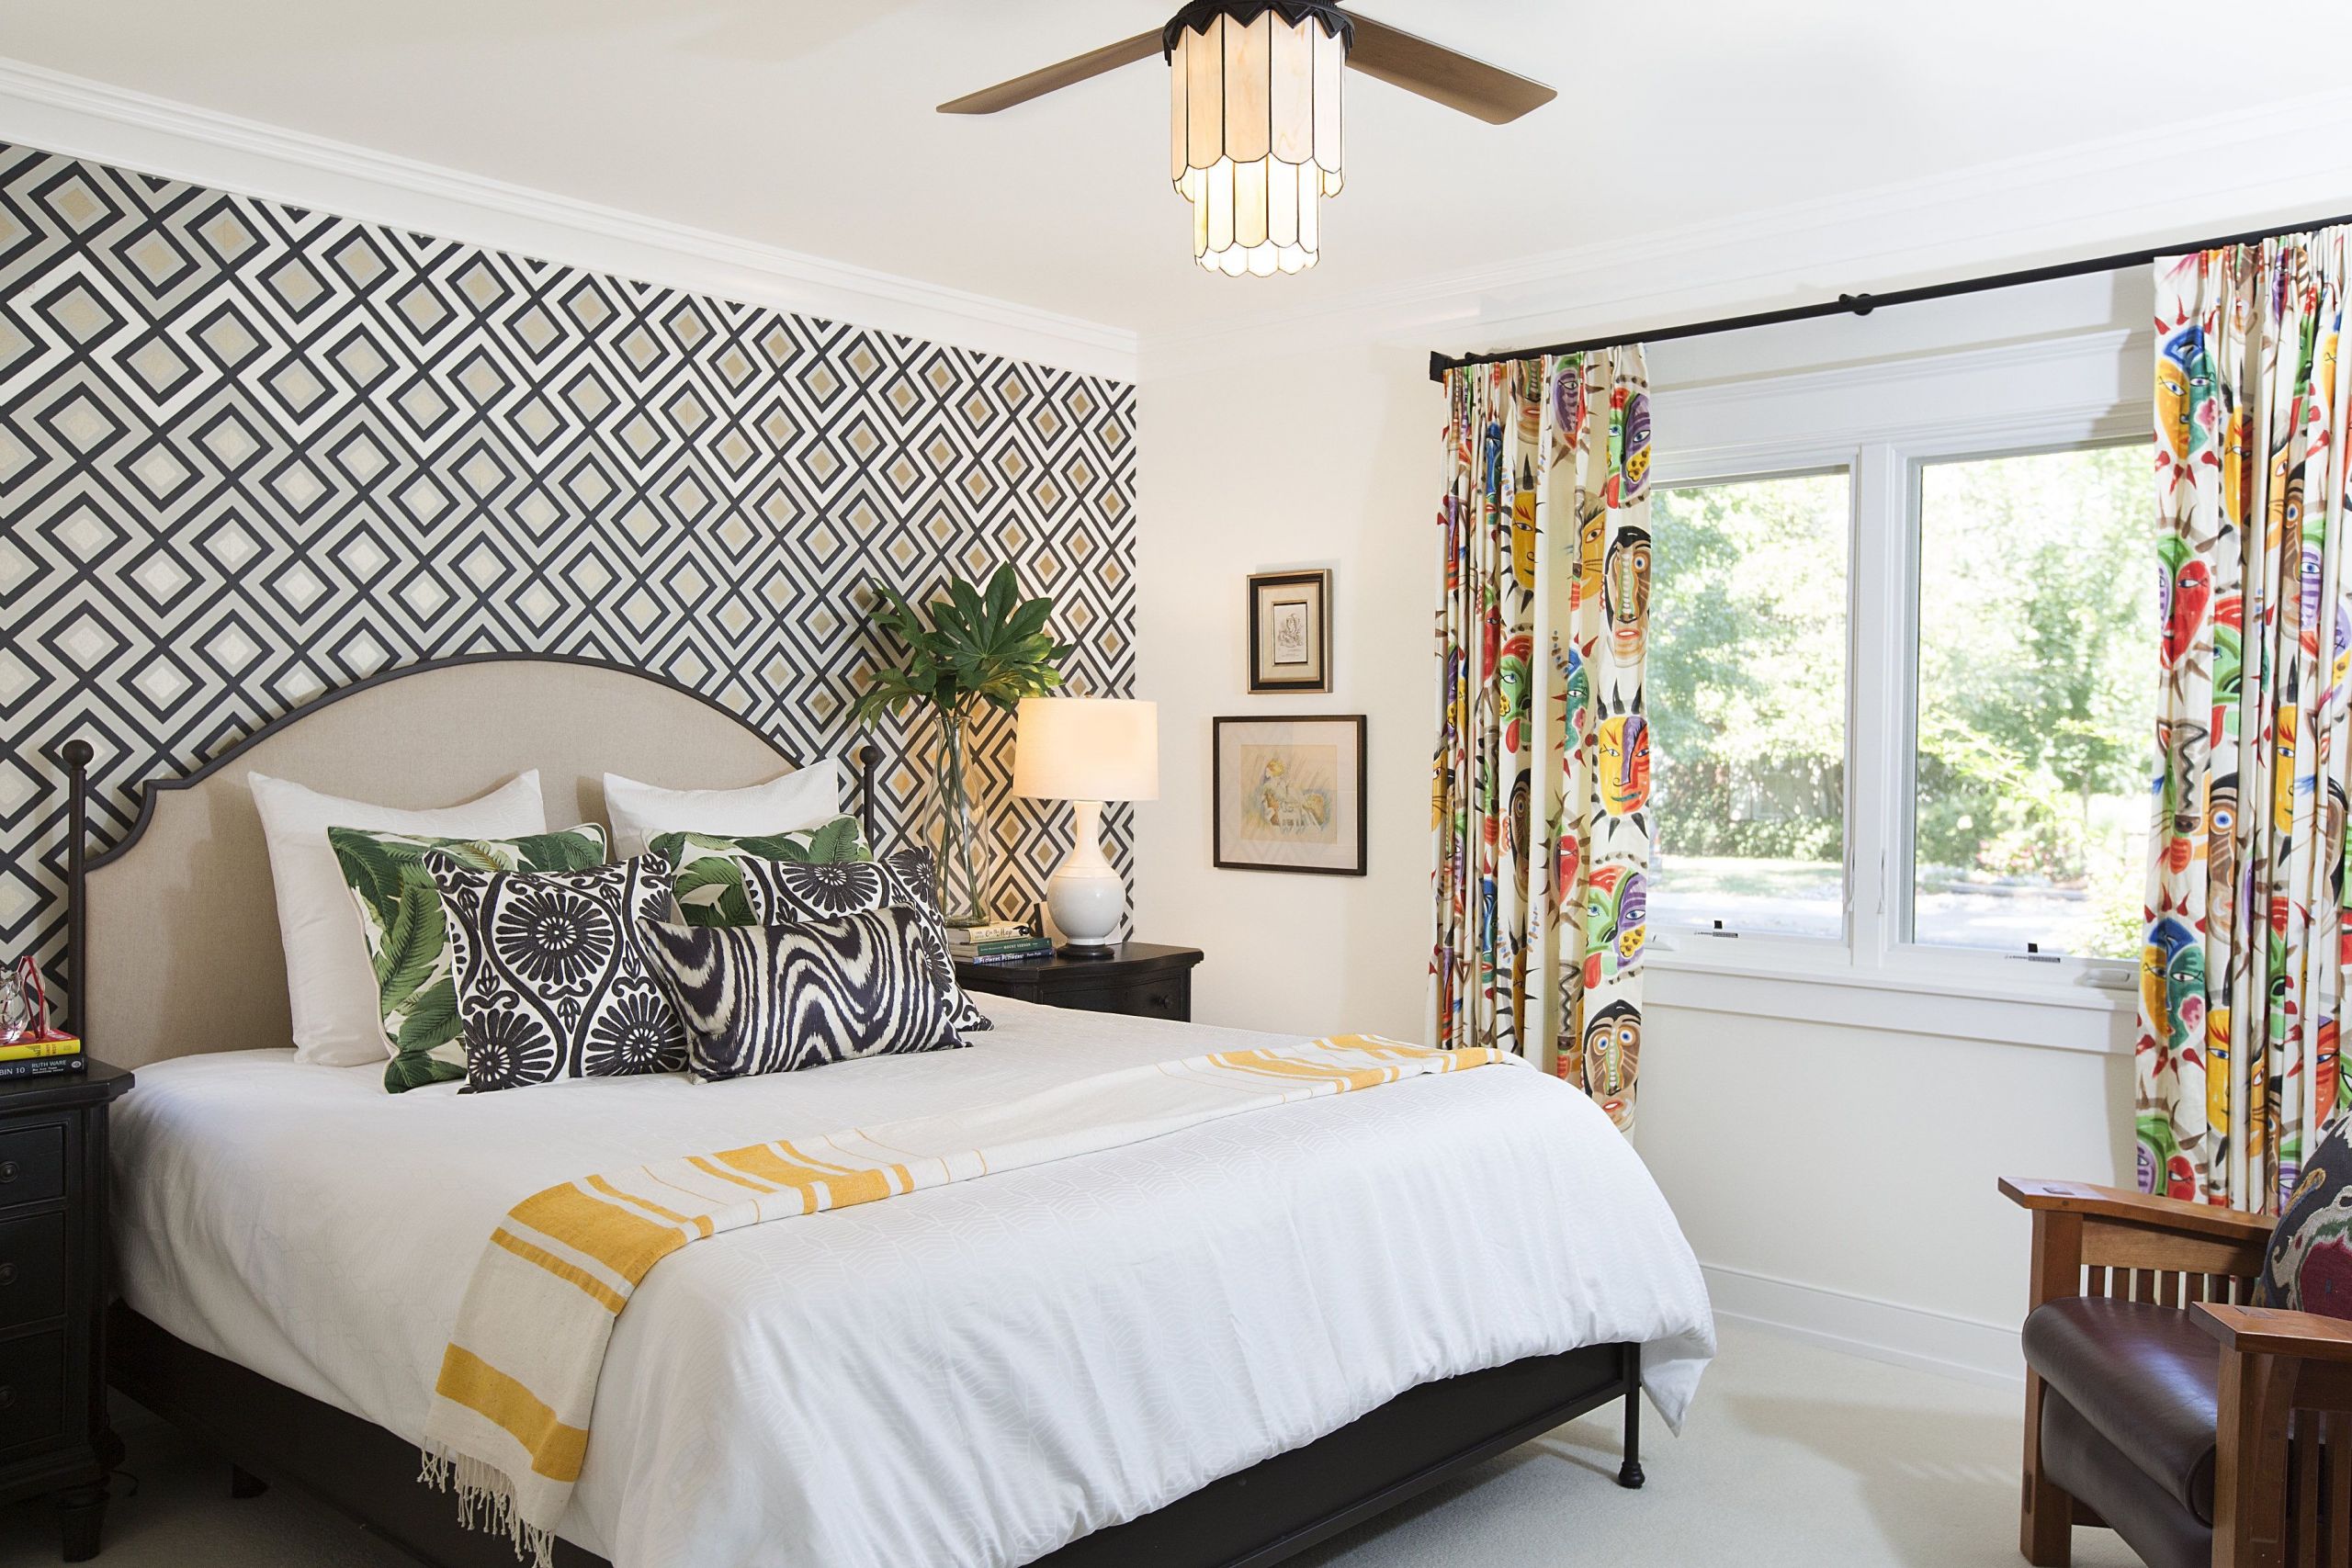 Accent Wallpaper Bedroom
 Accent wall with geometric wallpaper and colorful drapery